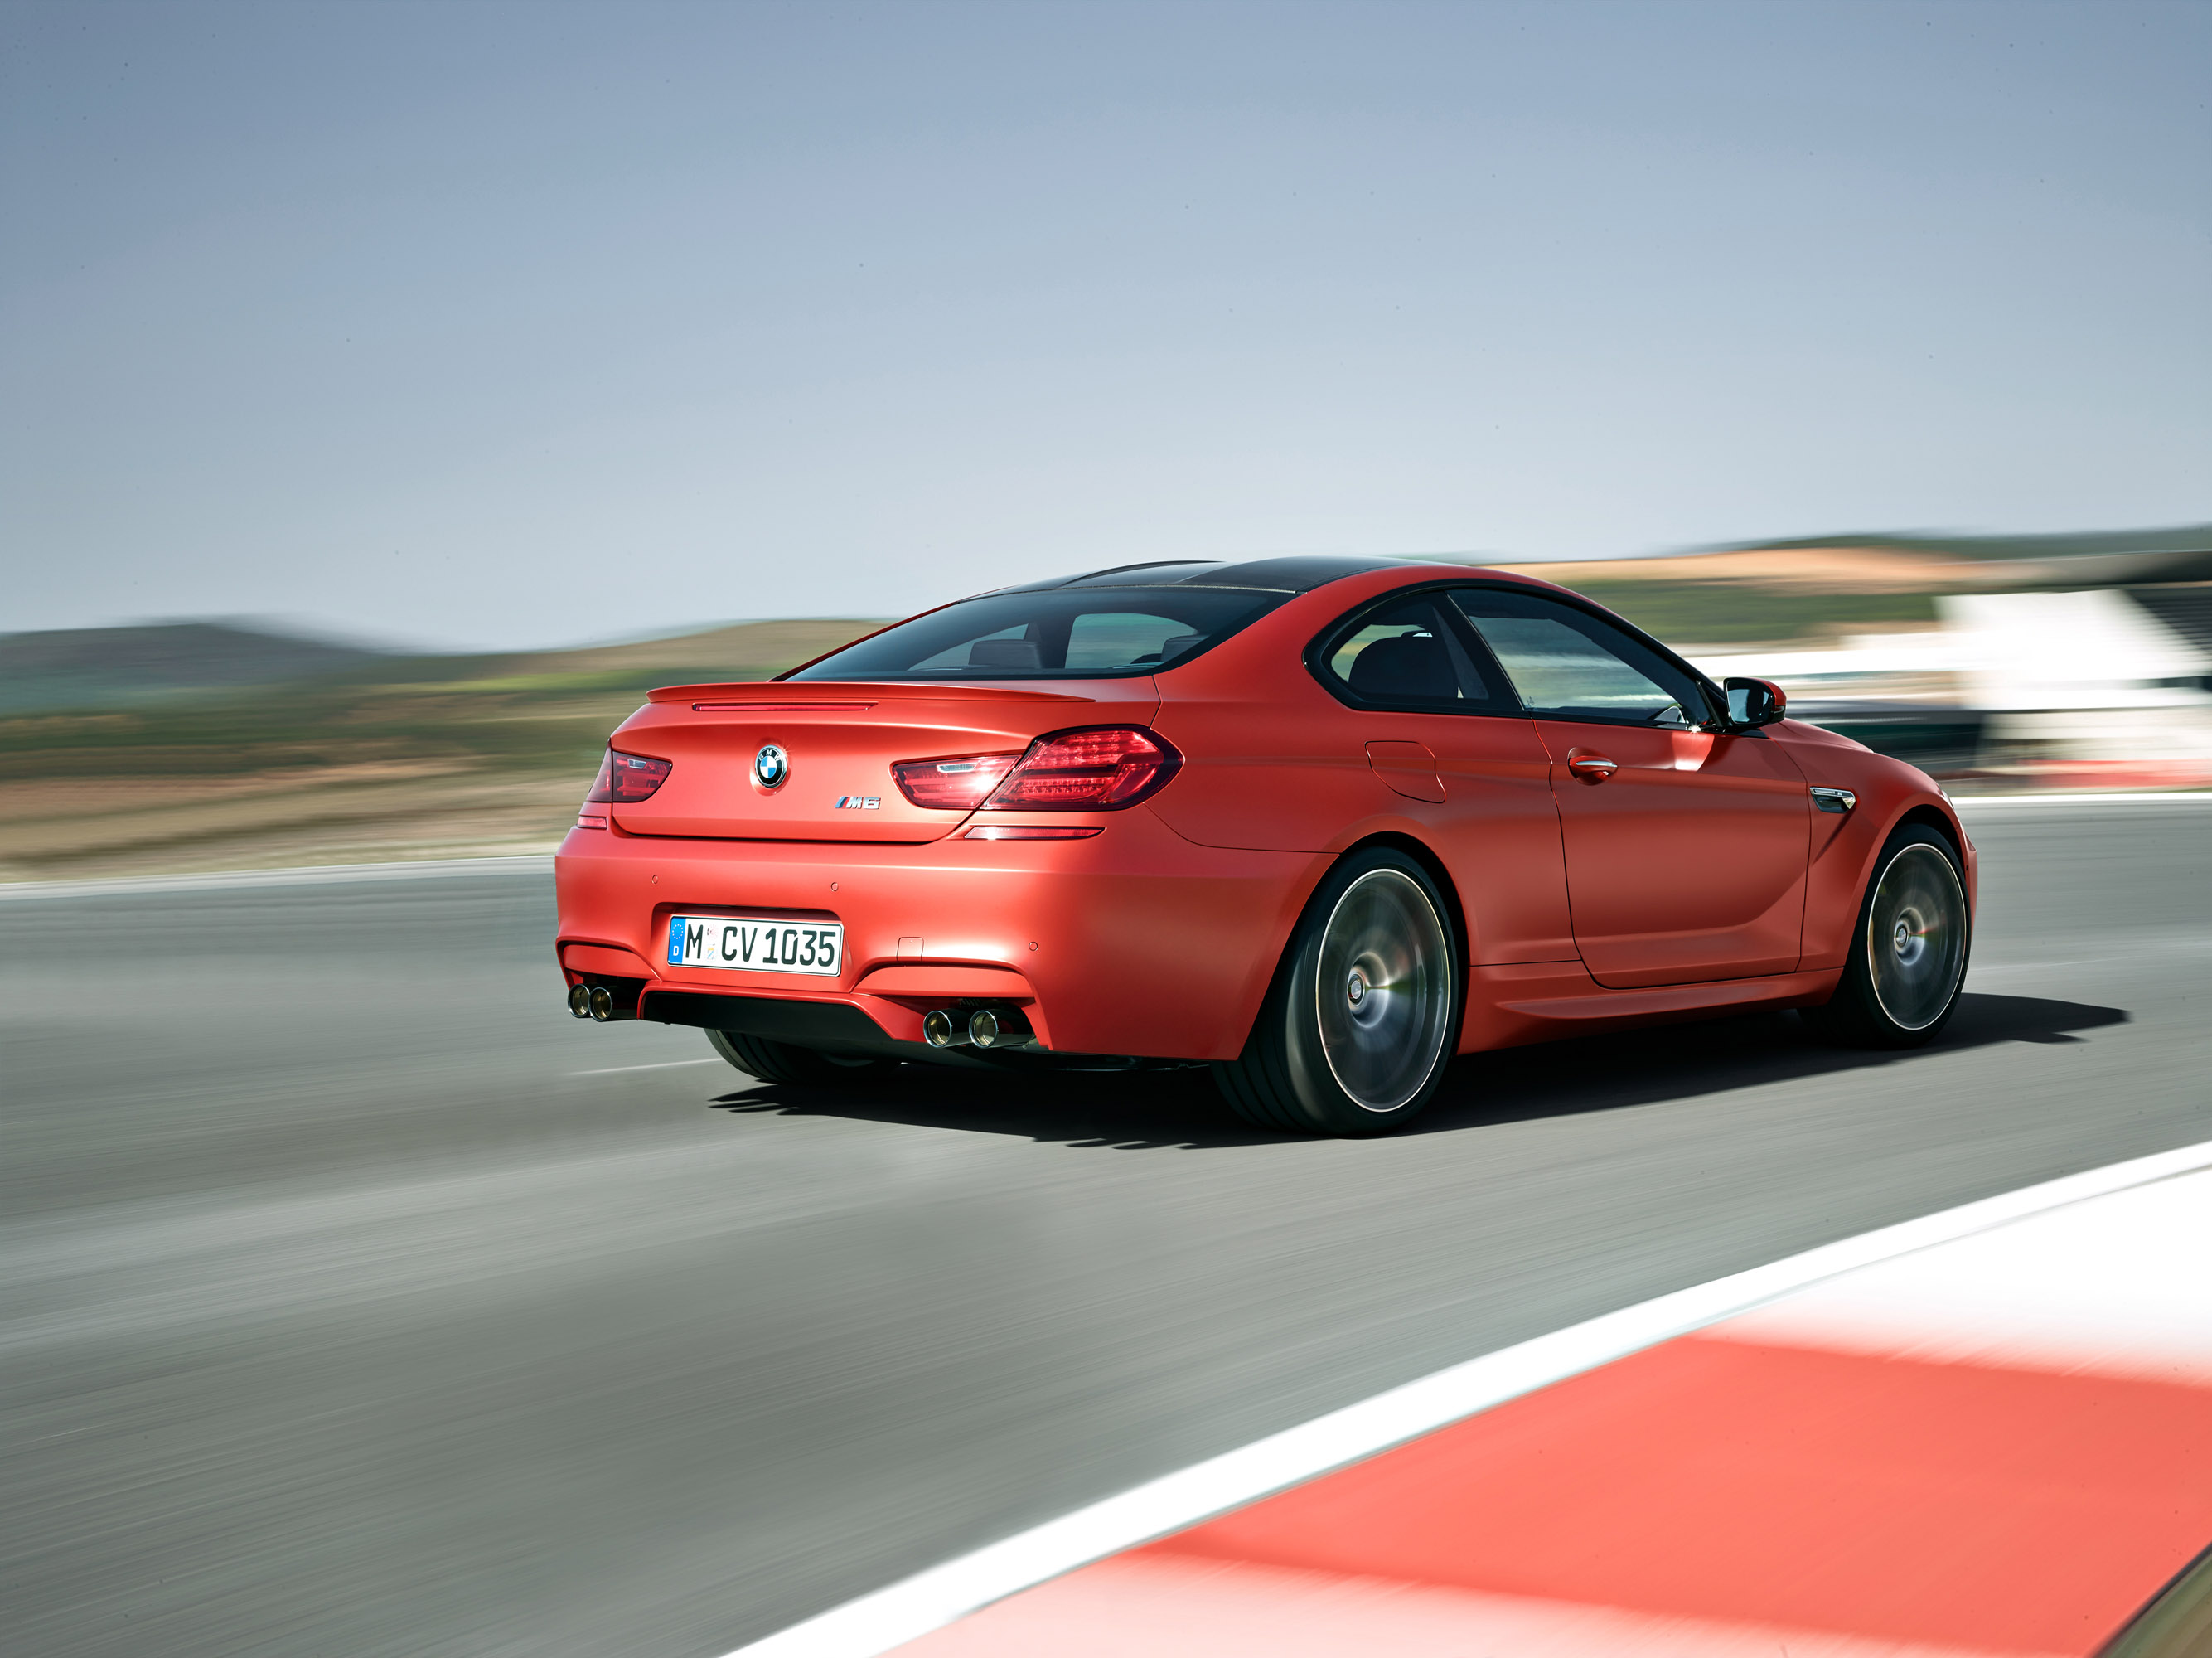 BMW m6 Coupe 2015